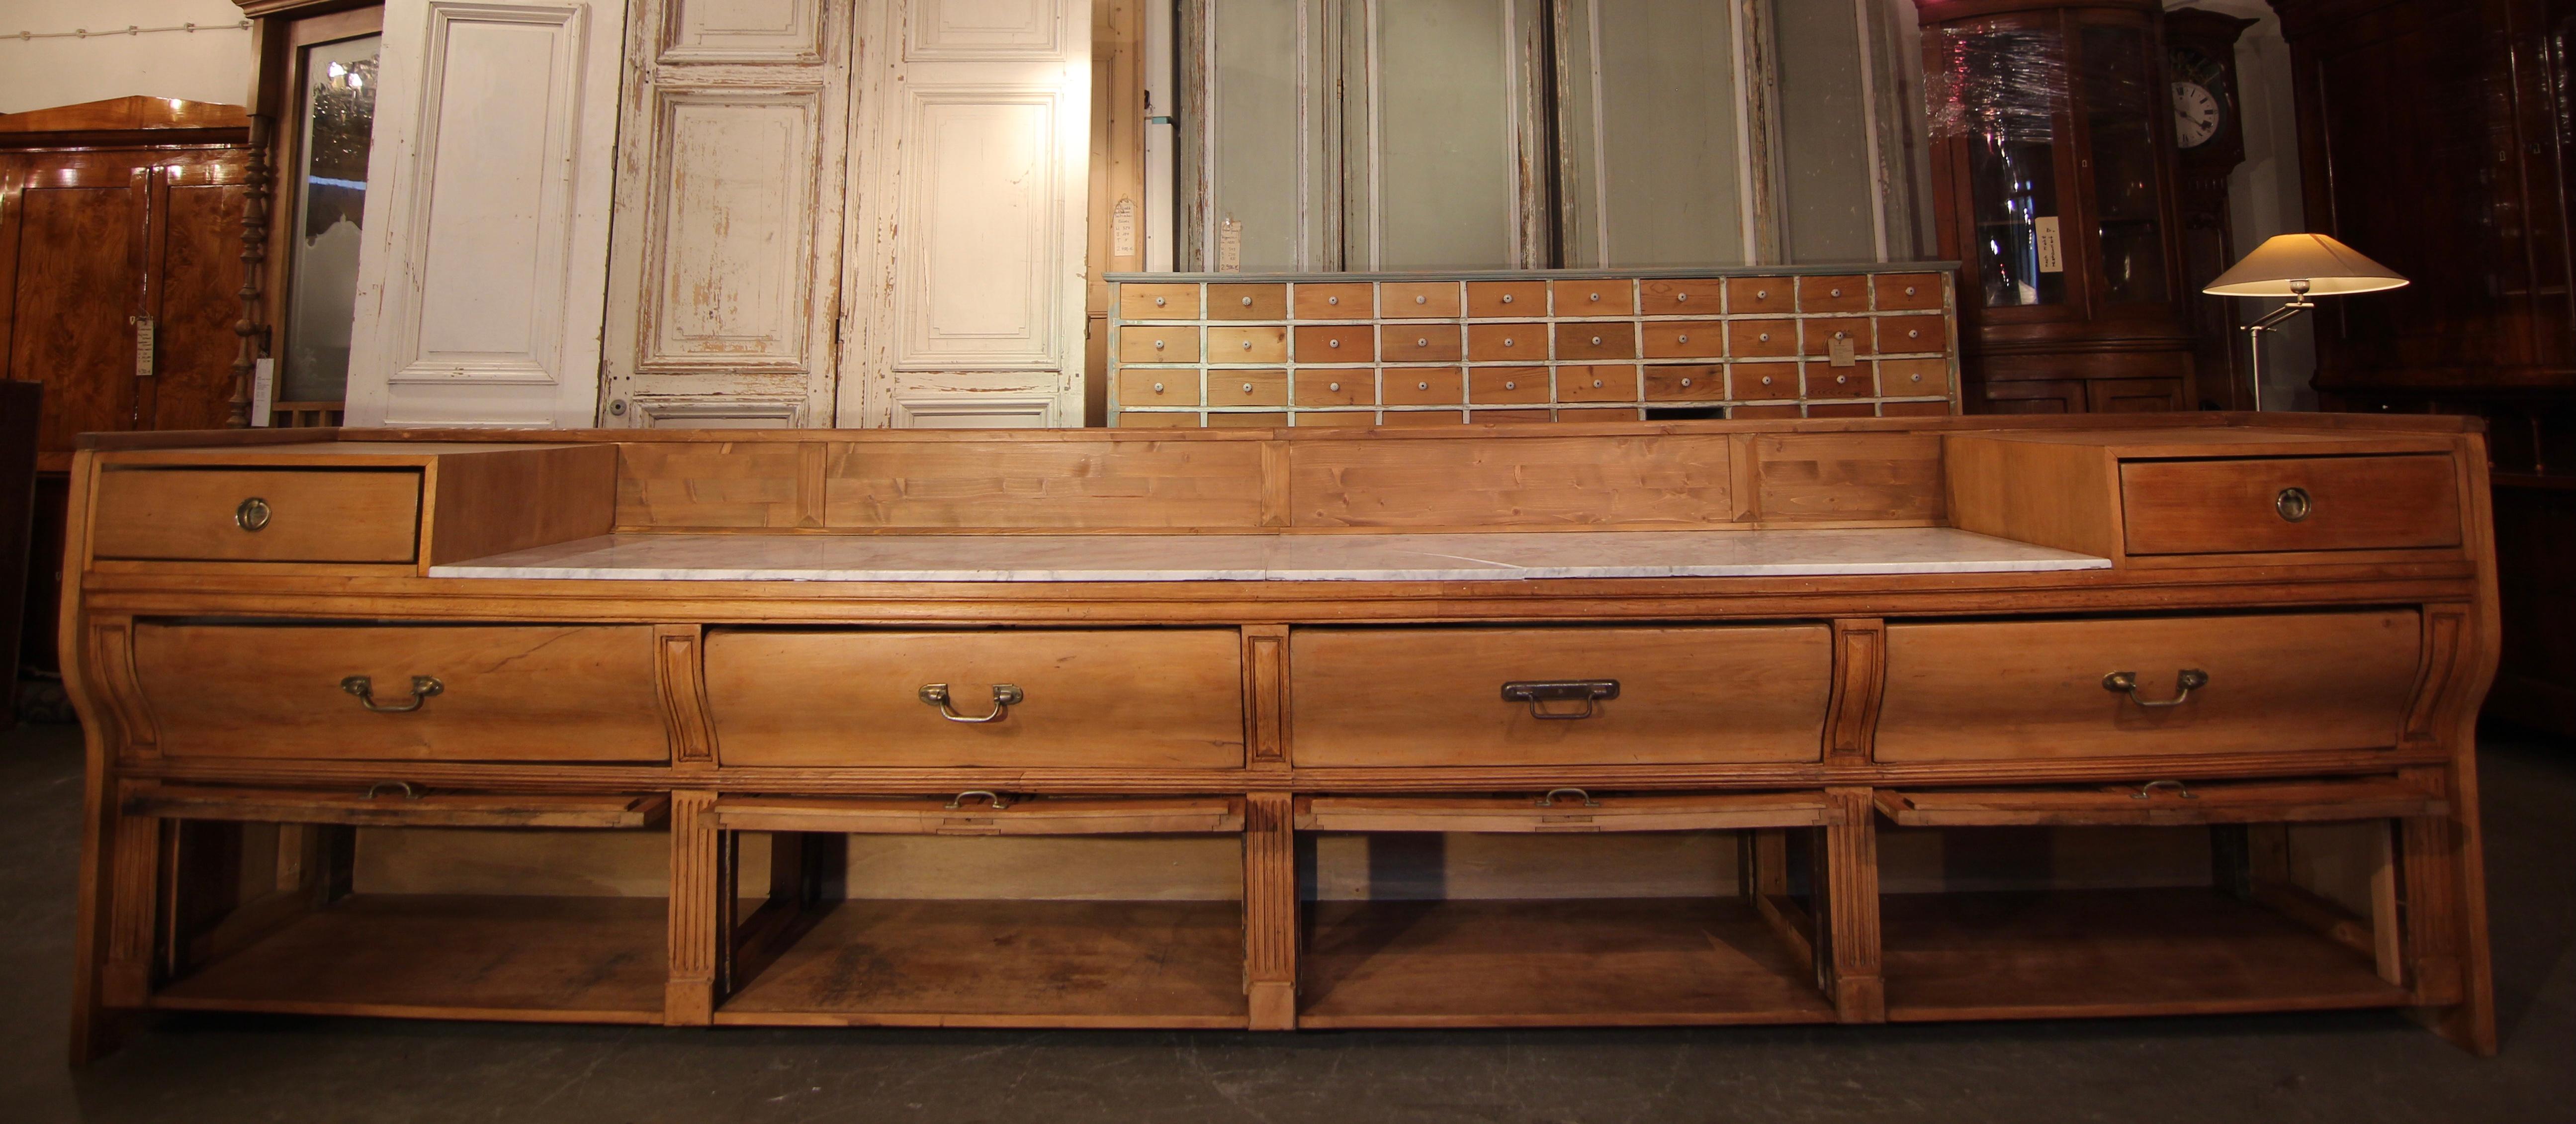 Early 20th Century Monumental French Bakery Counter or Sideboard 1